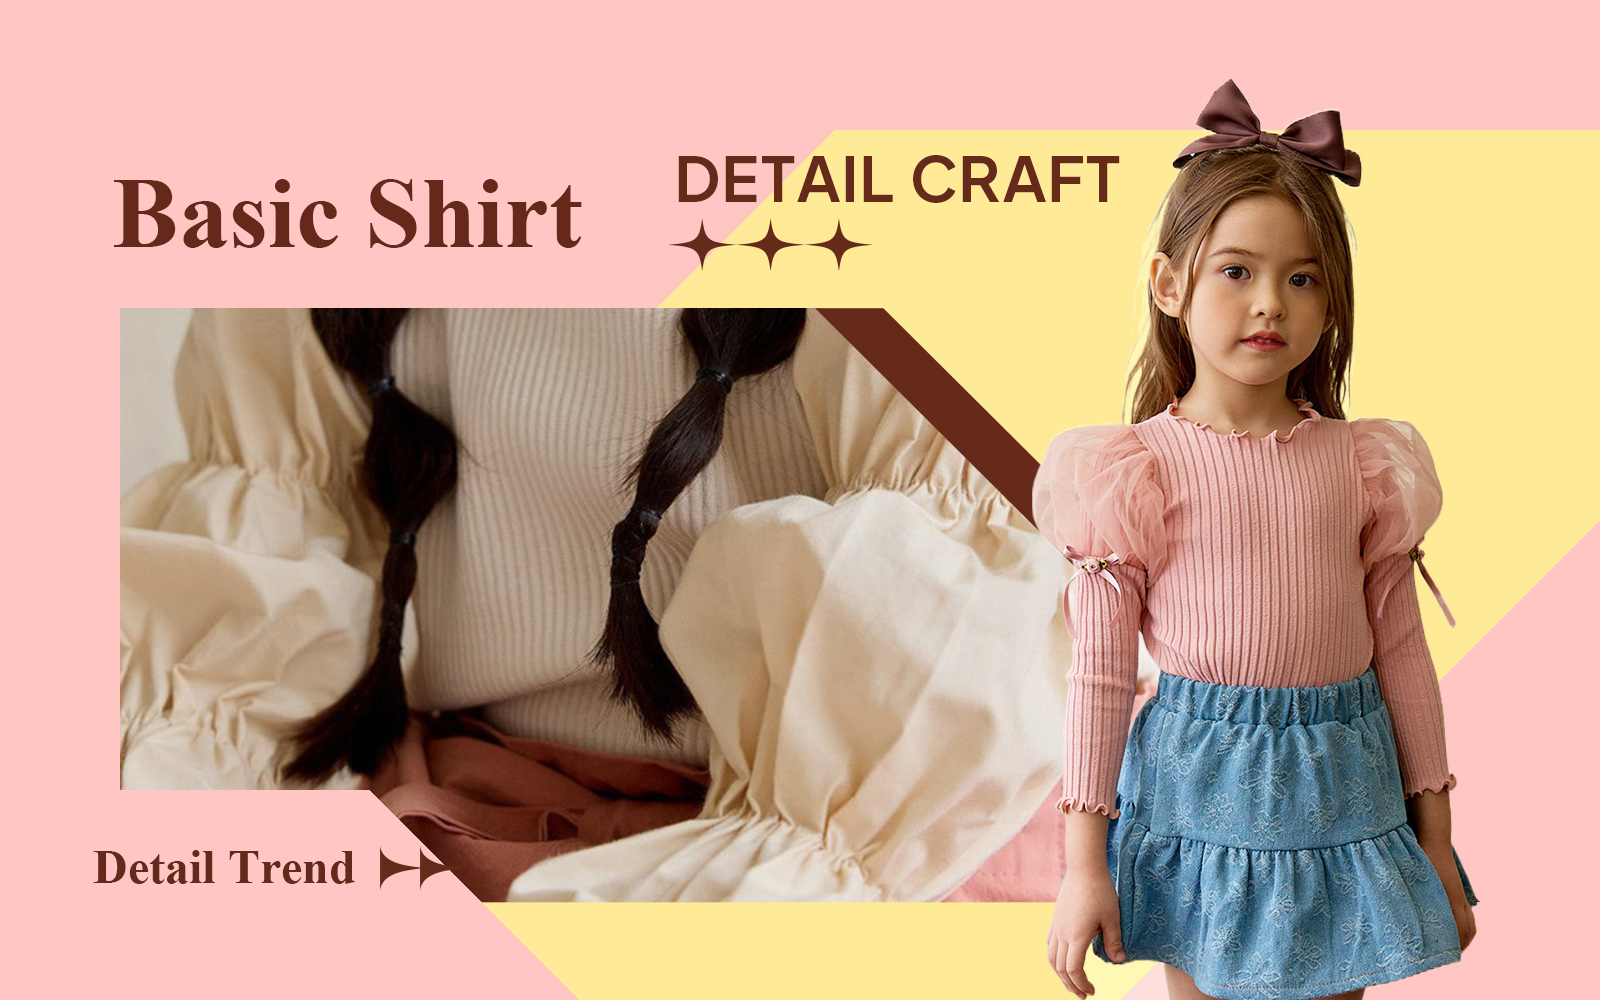 Basic Shirt -- The Detail & Craft Trend for Girlswear